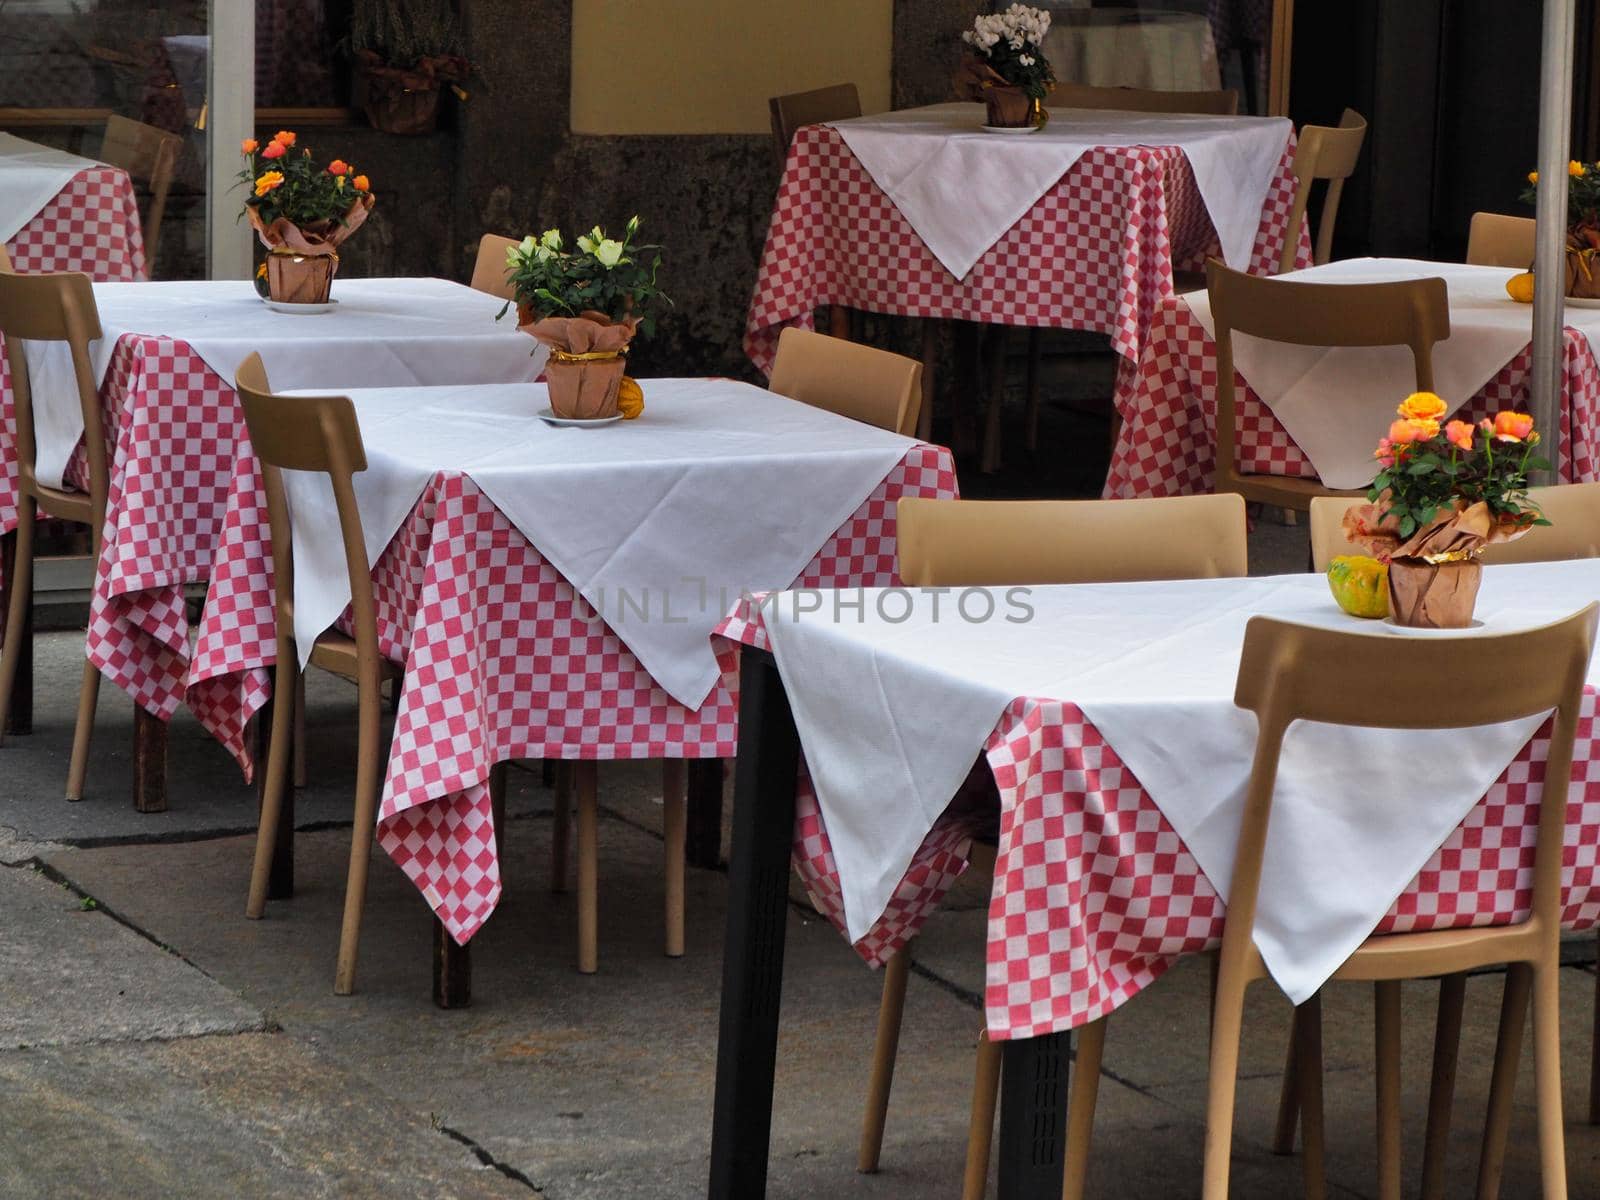 Tables of restaurant terrace deserted after the resurgence of cases of contagion of the pandemic Turin Italy October 16 2020